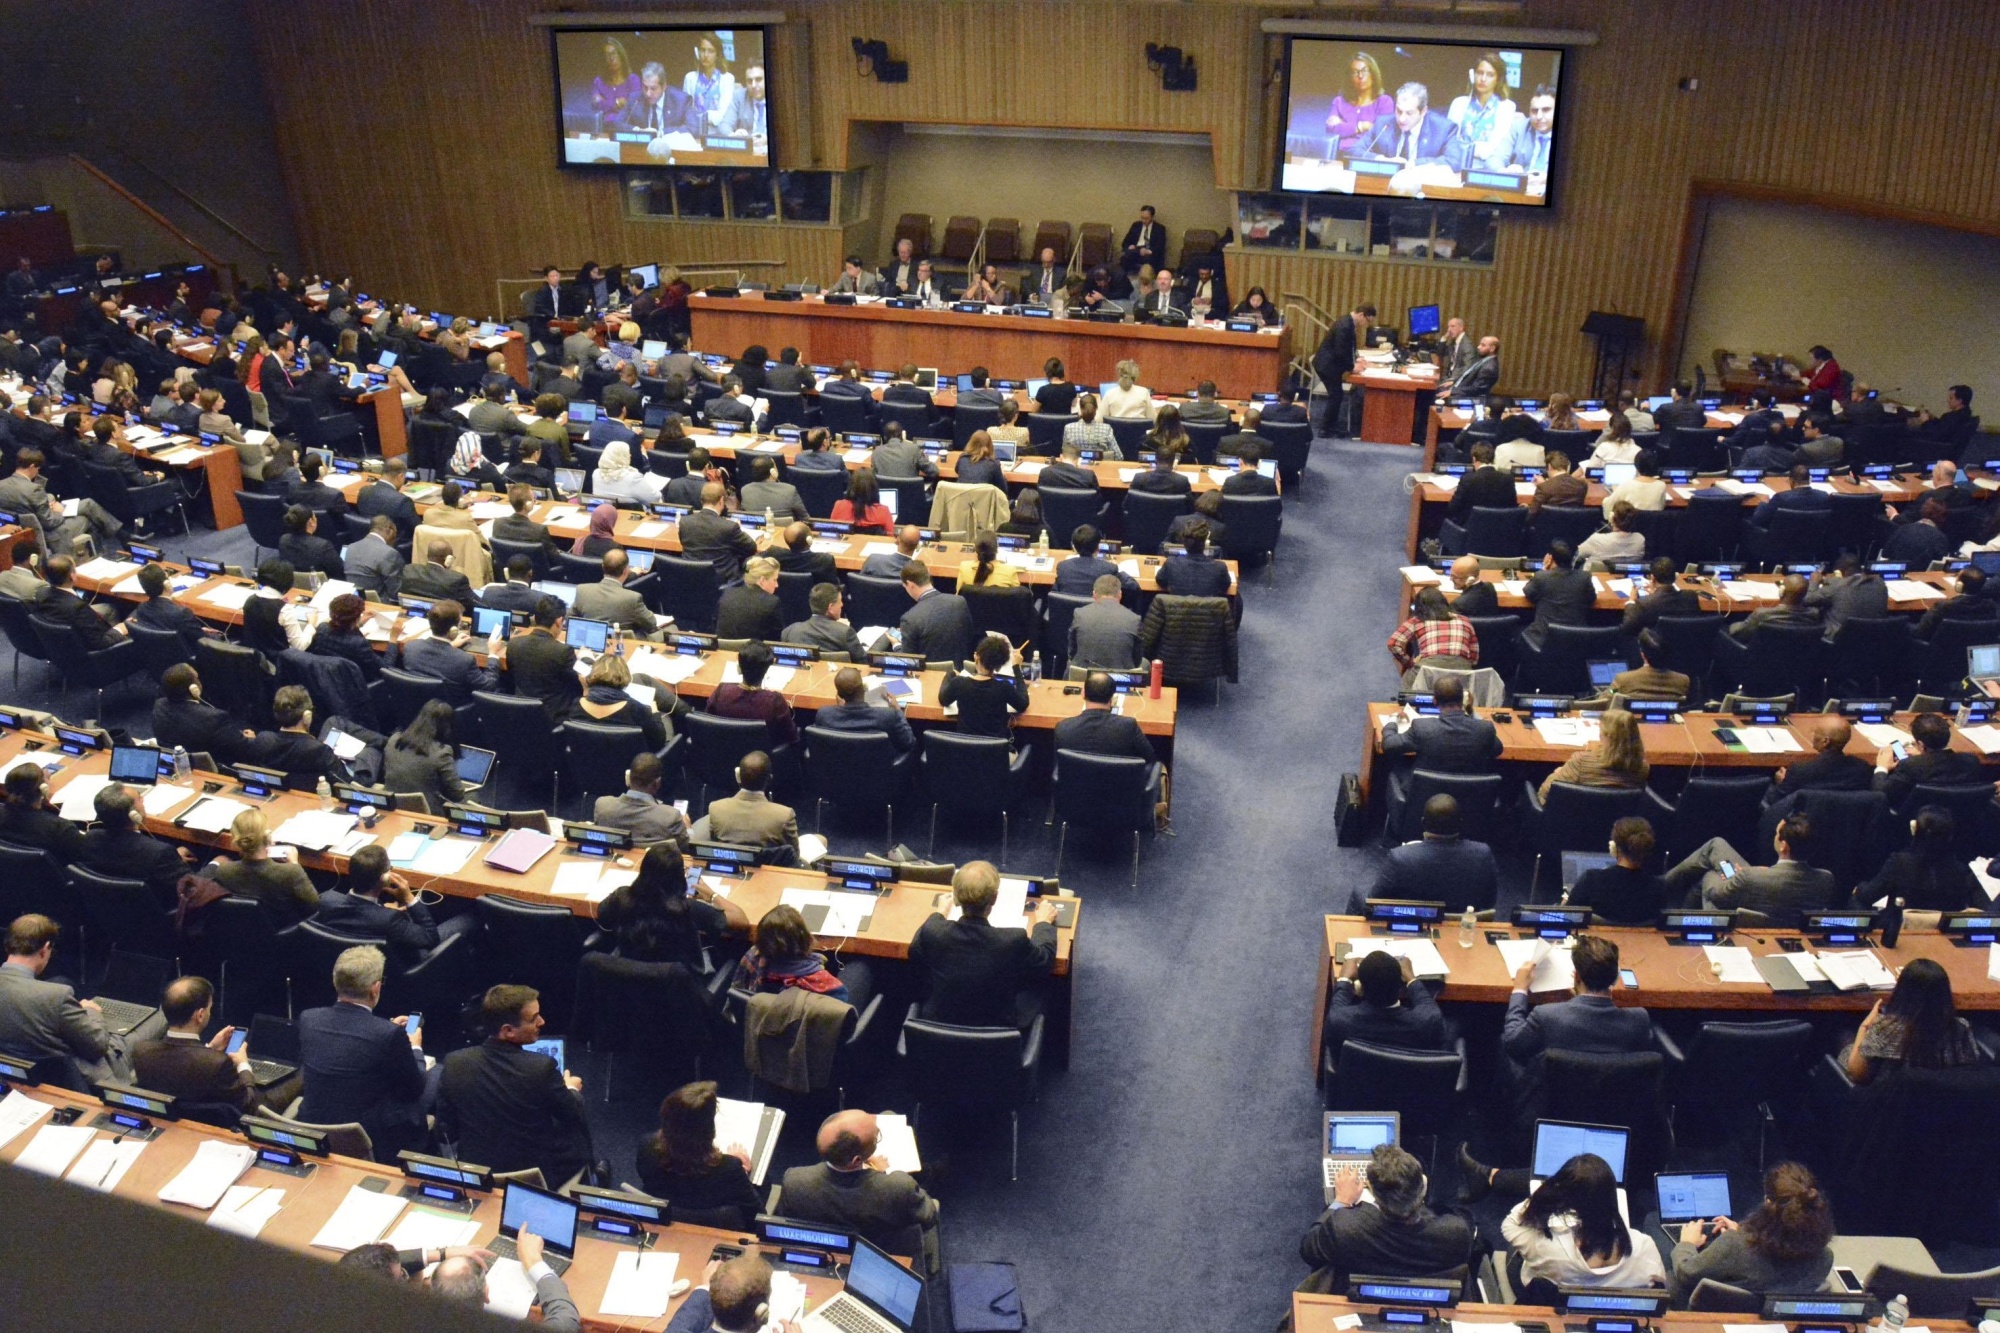 The First Committee on Disarmament Issues at the U.N. General Assembly in New York on Thursday adopted a resolution calling for the total elimination of nuclear arms. | KYODO